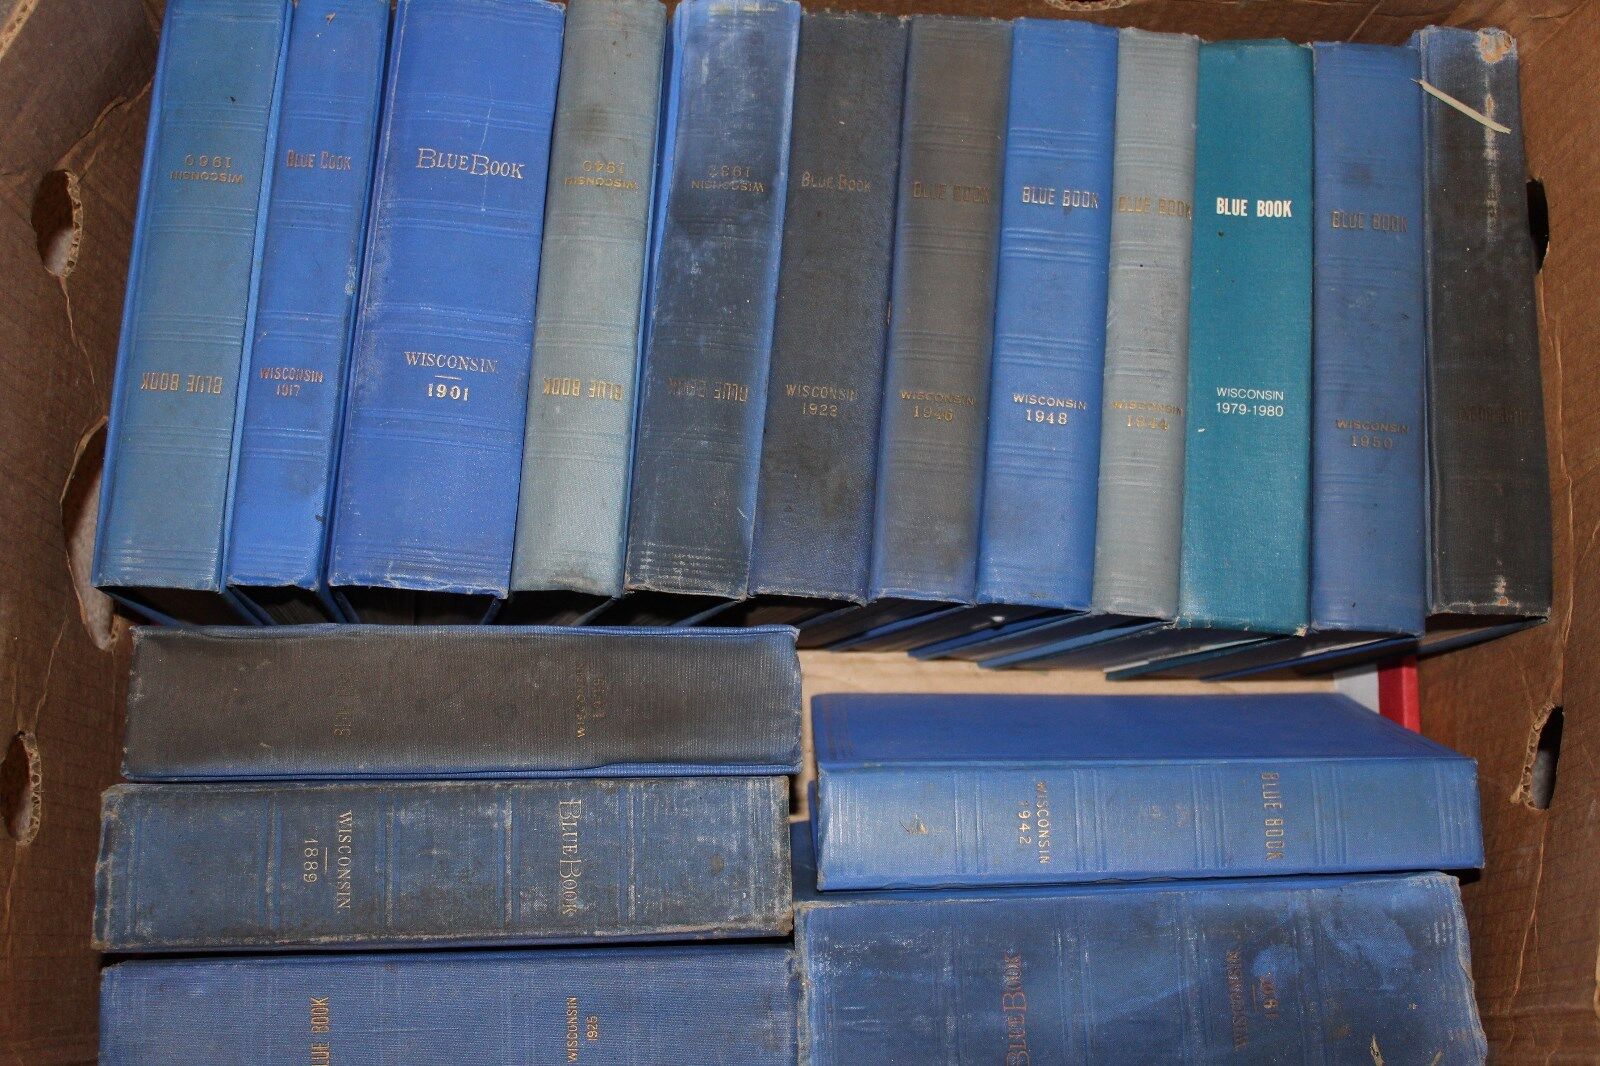 8pc BLUE BOOK Wisconsin LOT 1901 1925 1940 1942 1944 1960 1979-80